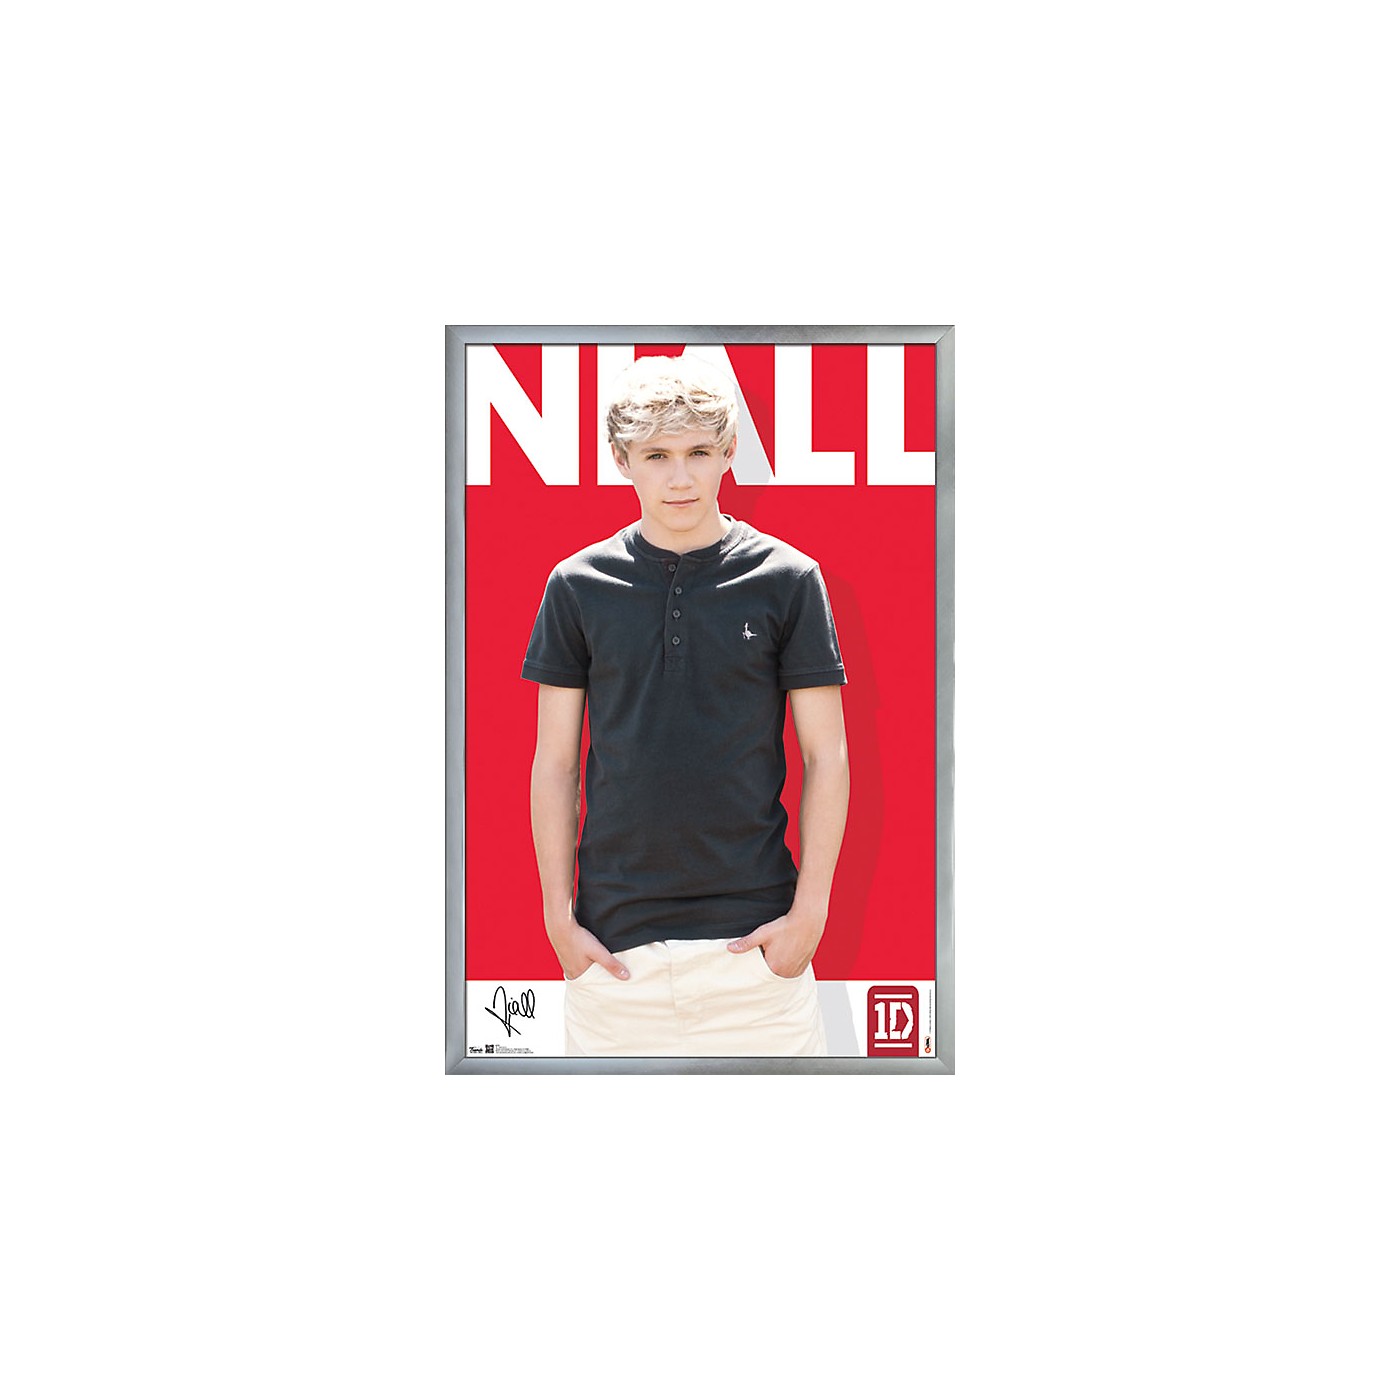 Trends International One Direction - Niall Horan Poster thumbnail